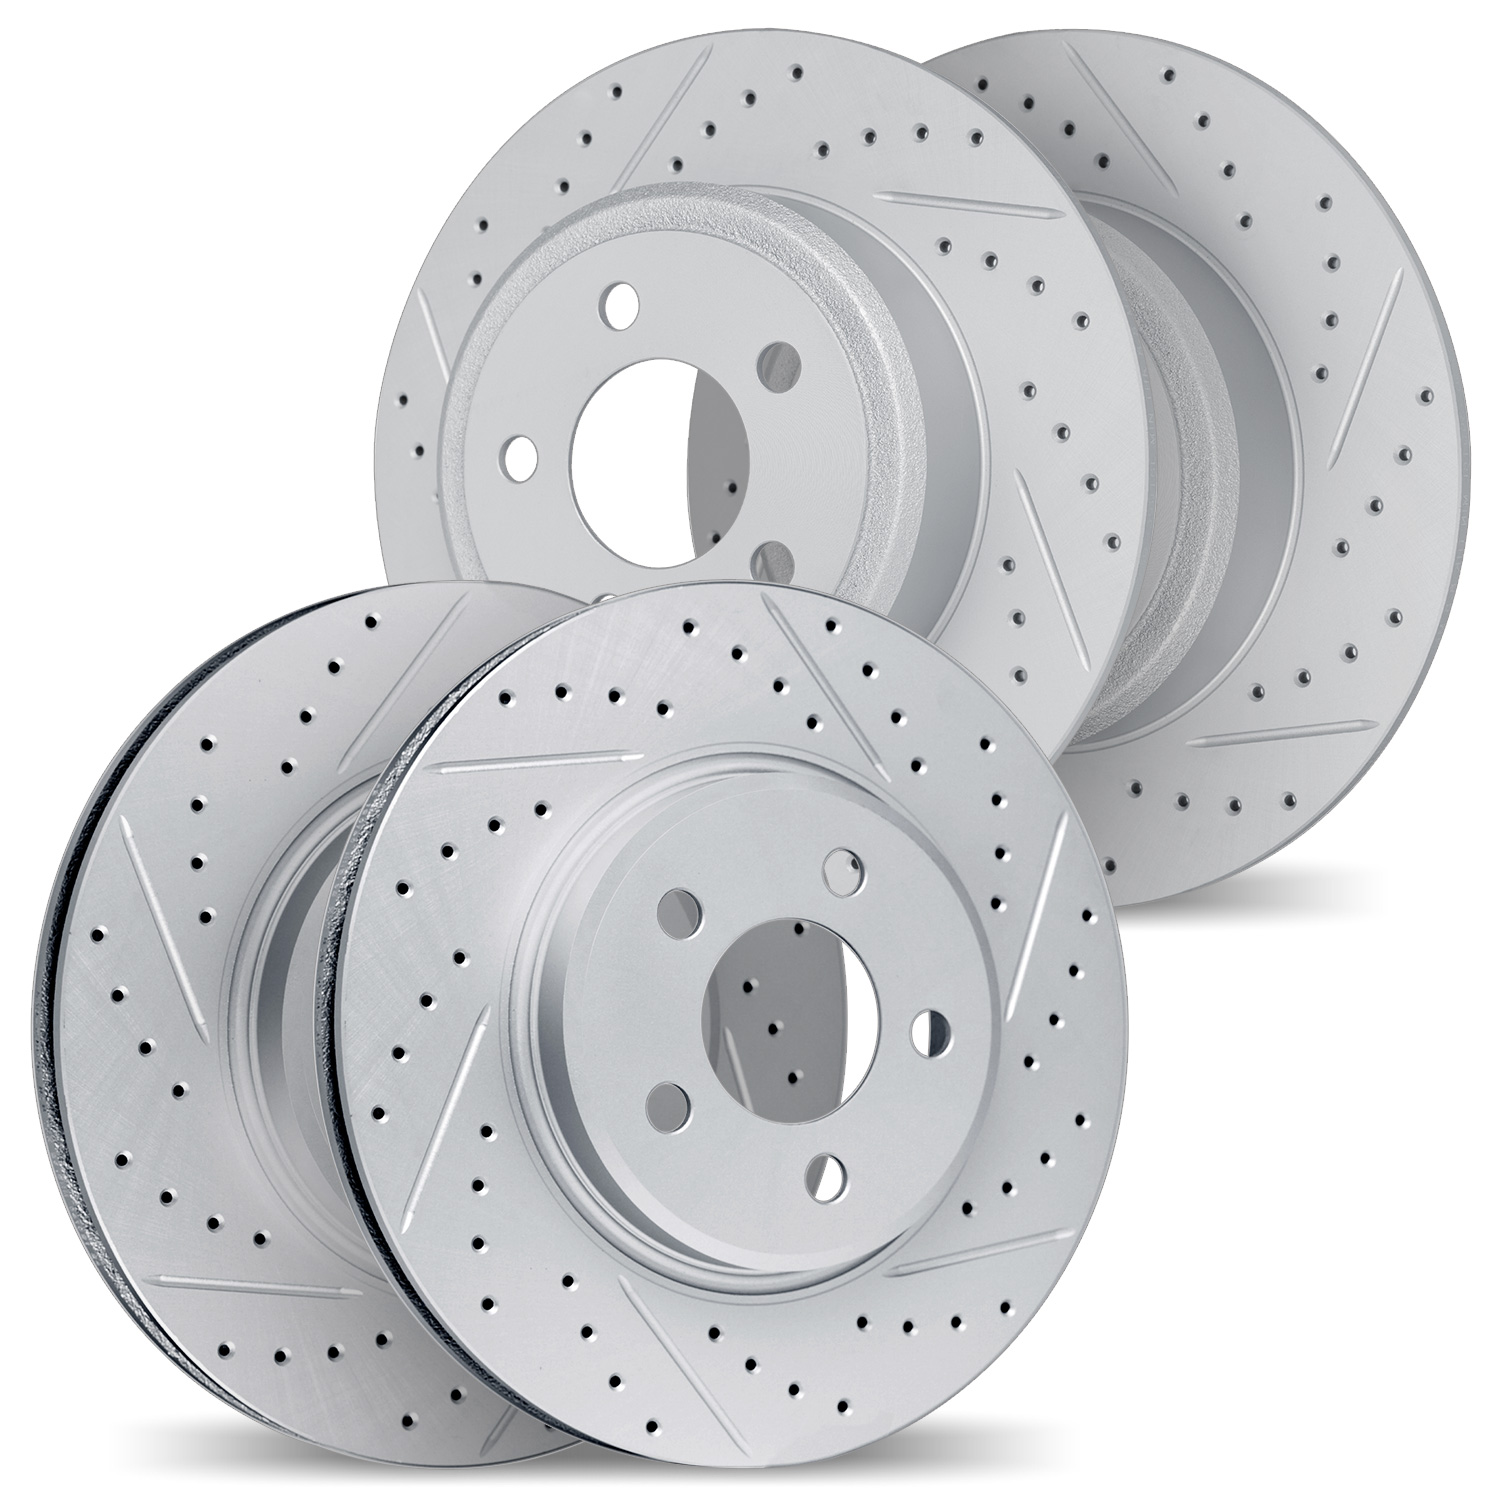 2004-01006 Geoperformance Drilled/Slotted Brake Rotors, 2010-2013 Suzuki, Position: Front and Rear